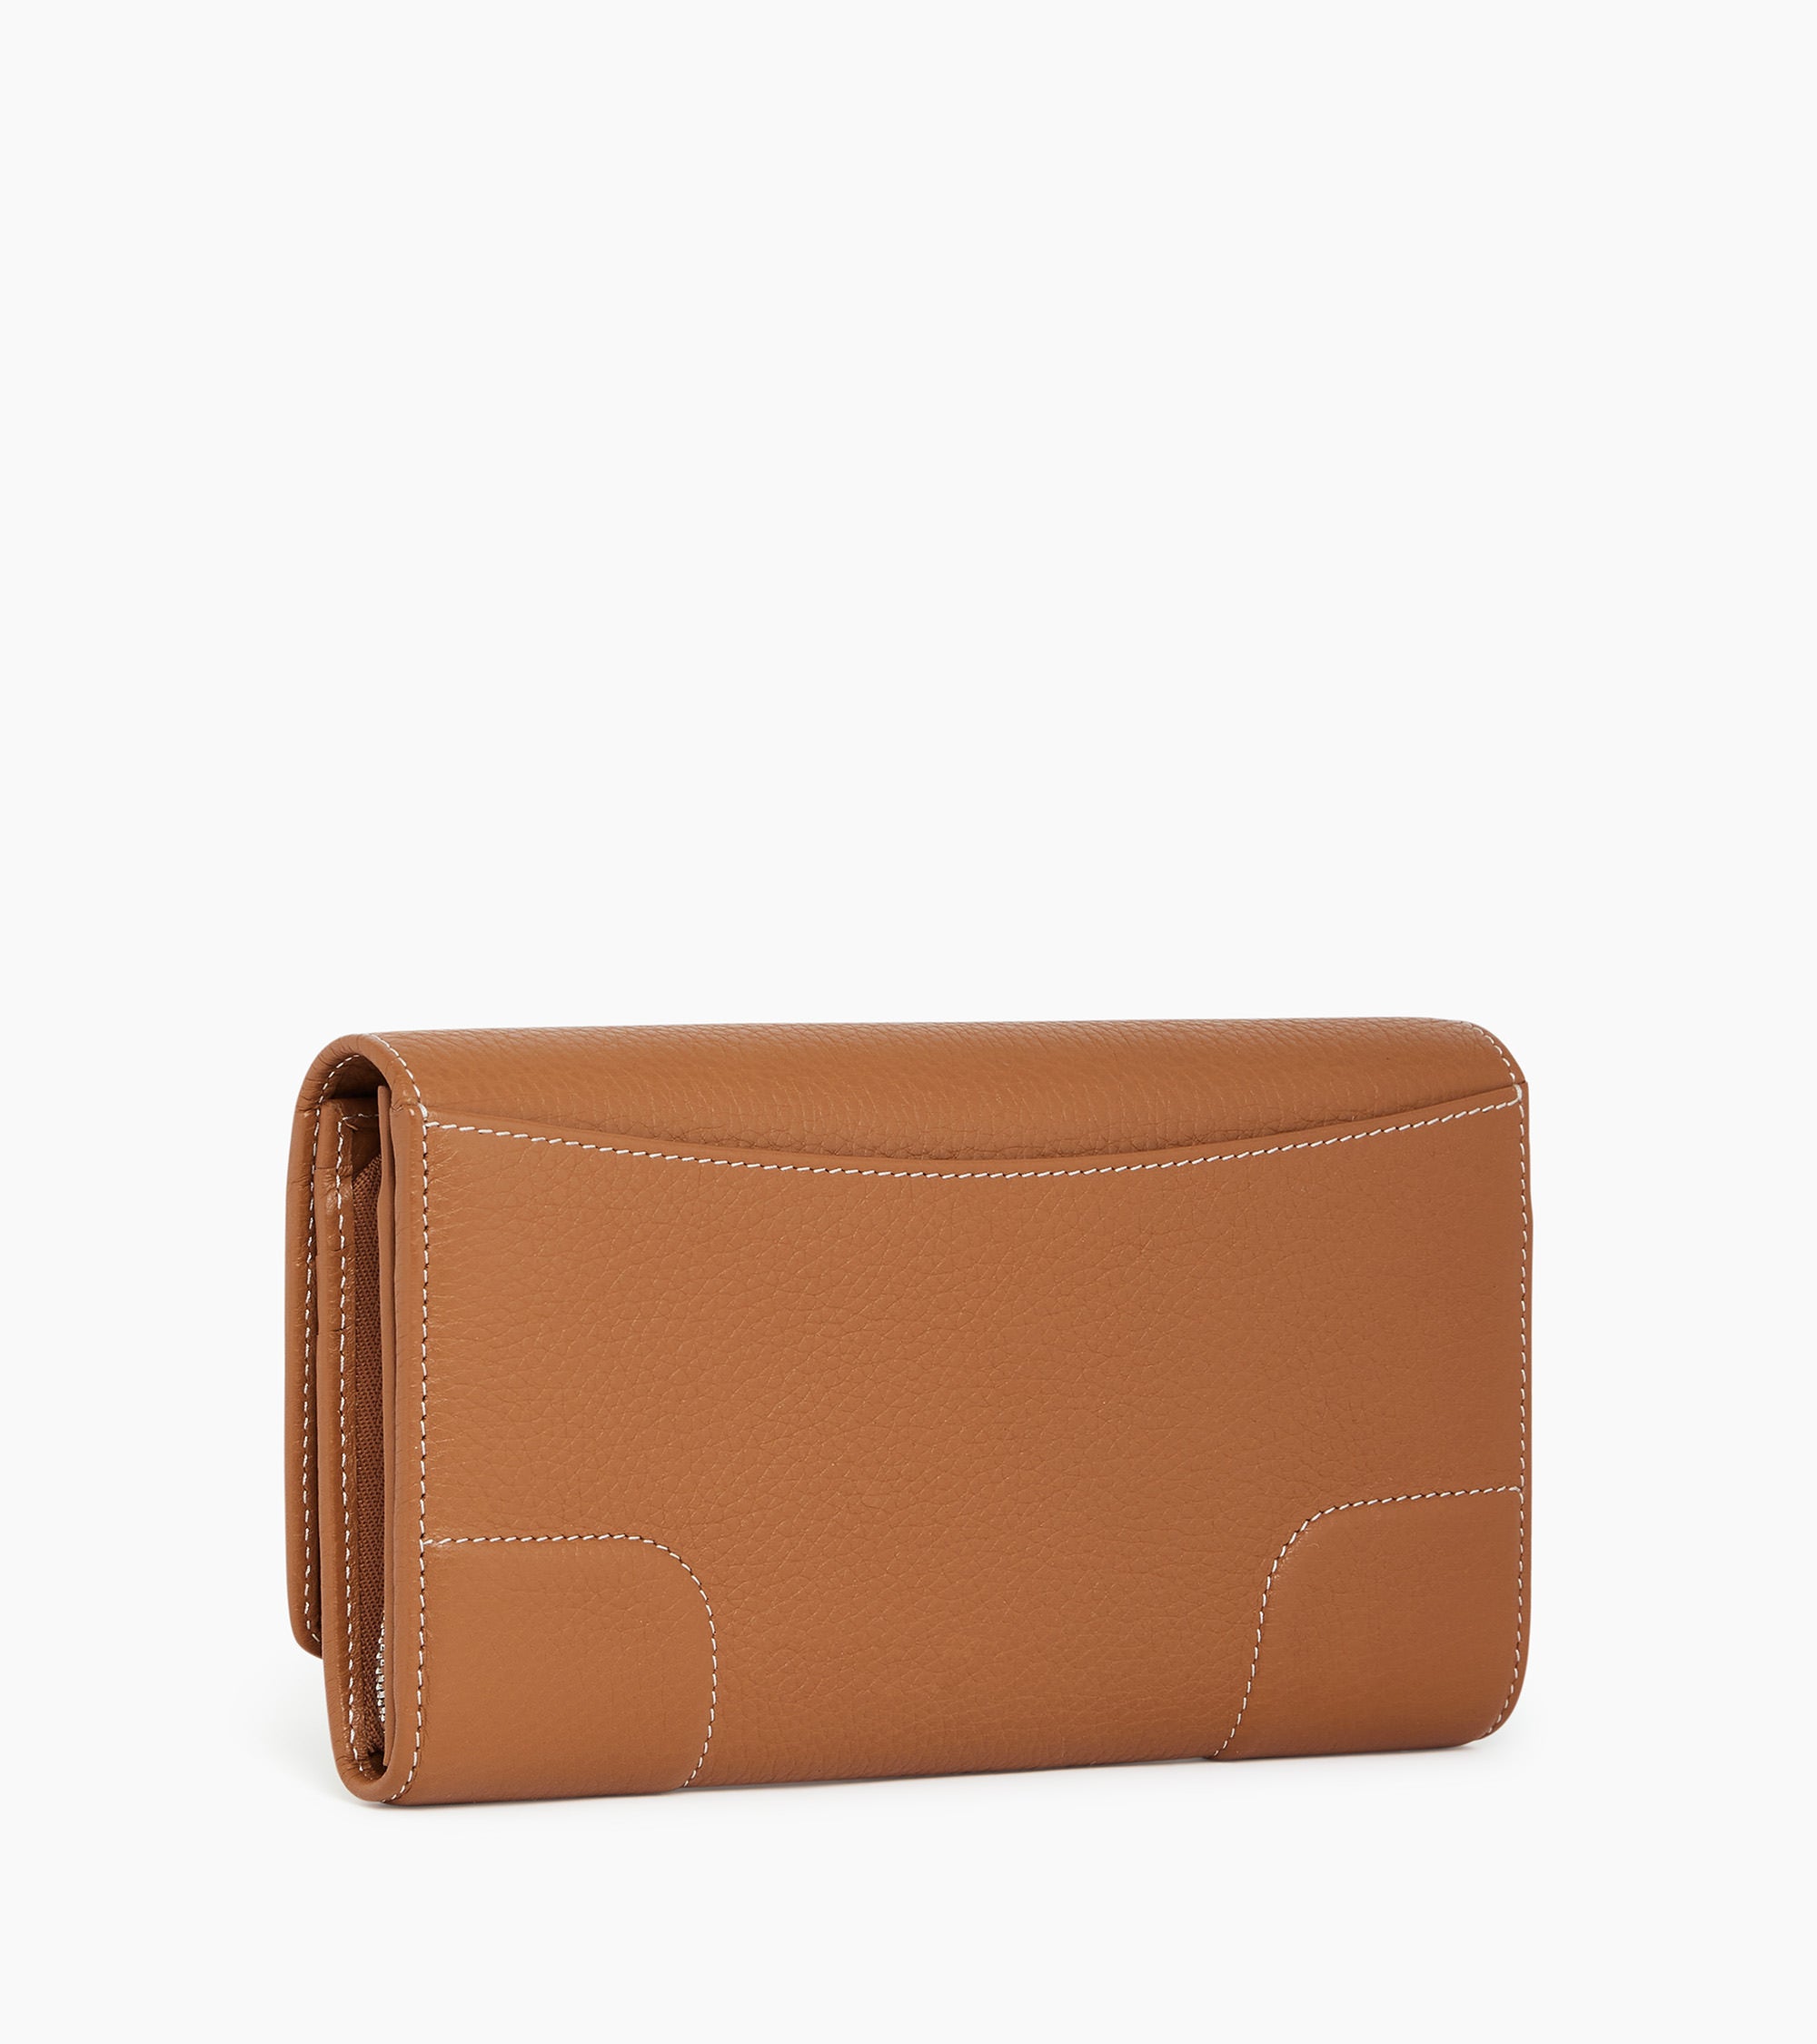 Romy large, zipped wallet in grained leather